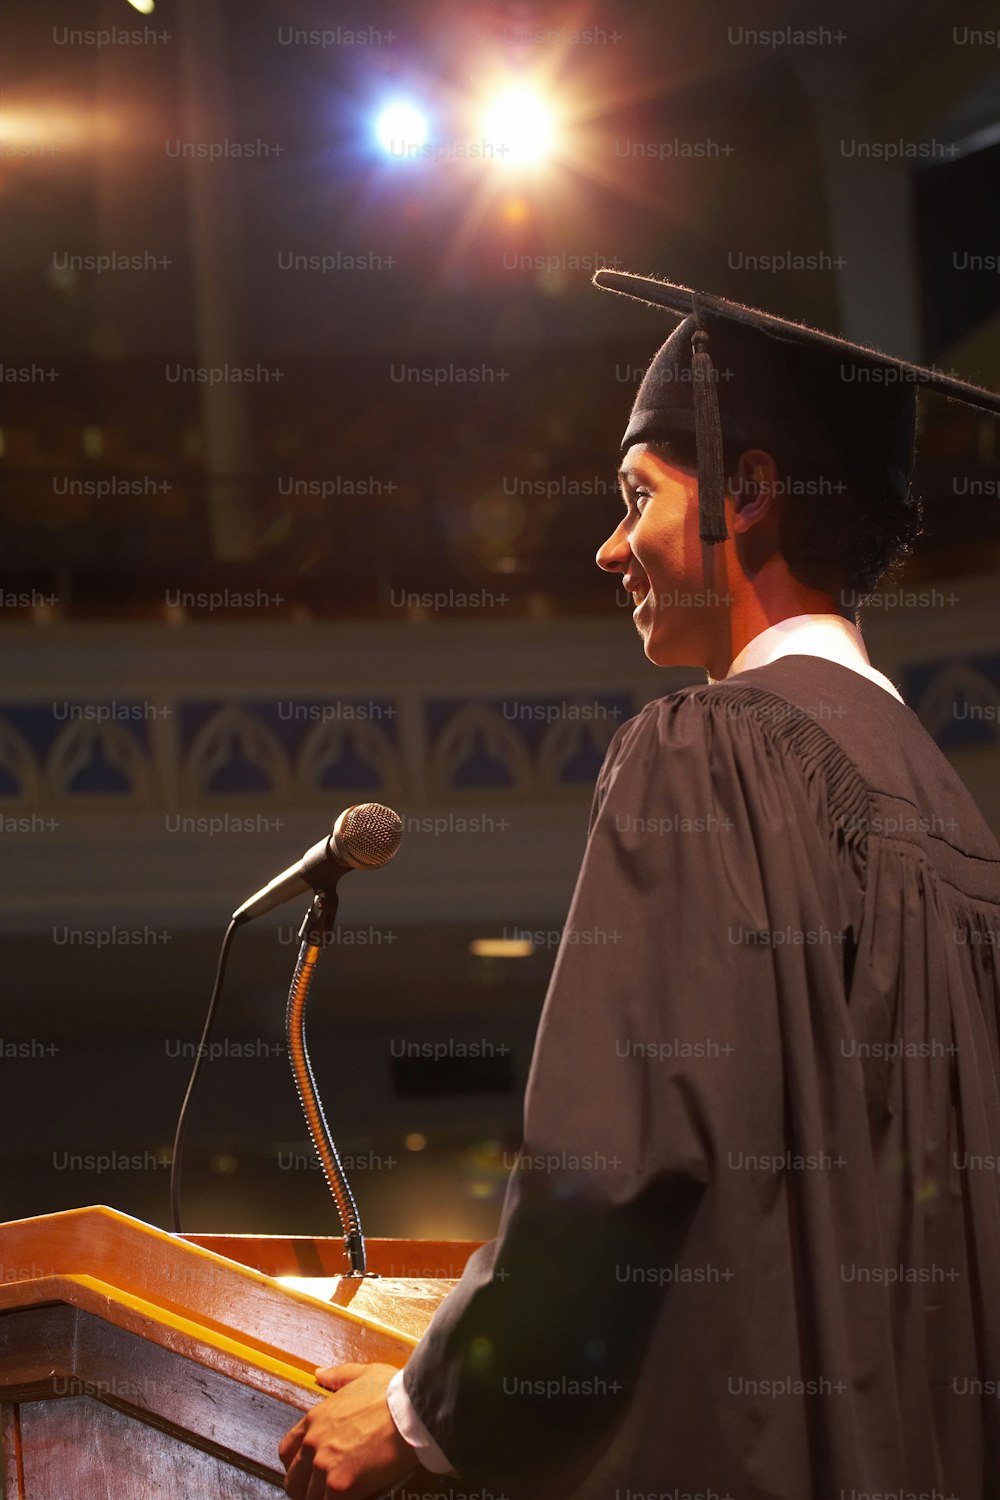 a man in a graduation gown standing at a podium